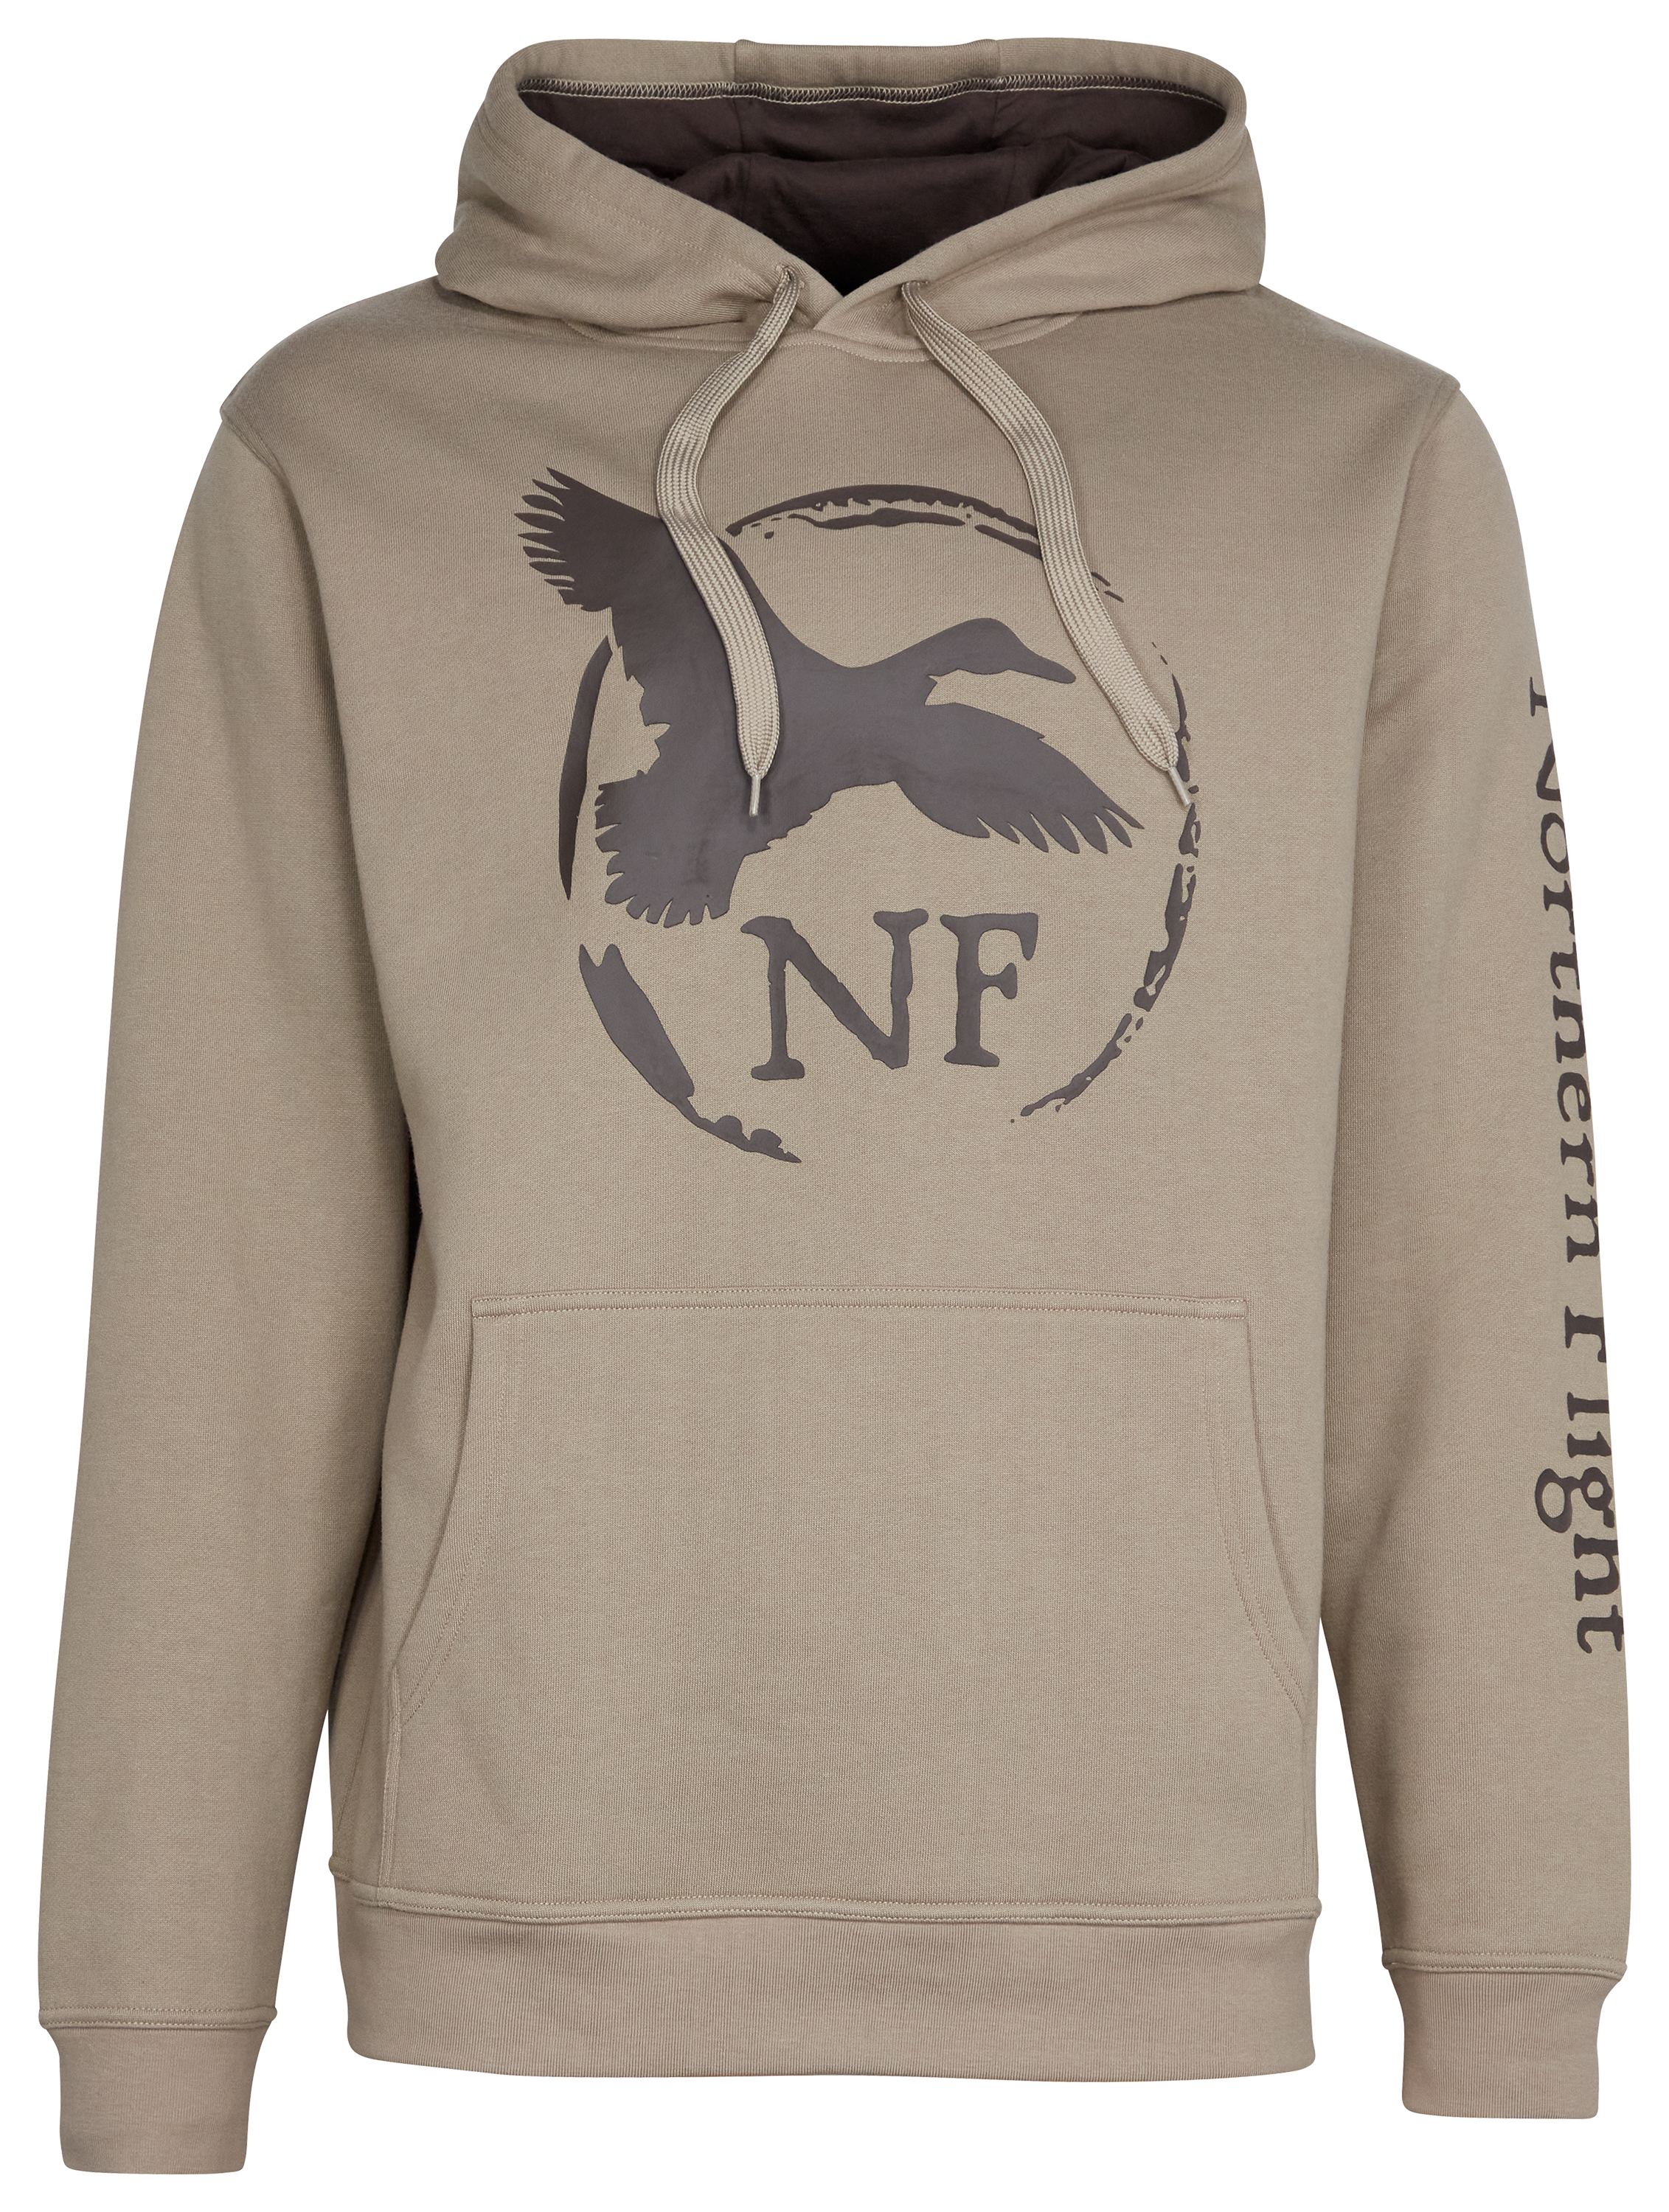 Northern Flight Long-Sleeve Hoodie for Men - Bright White - XL